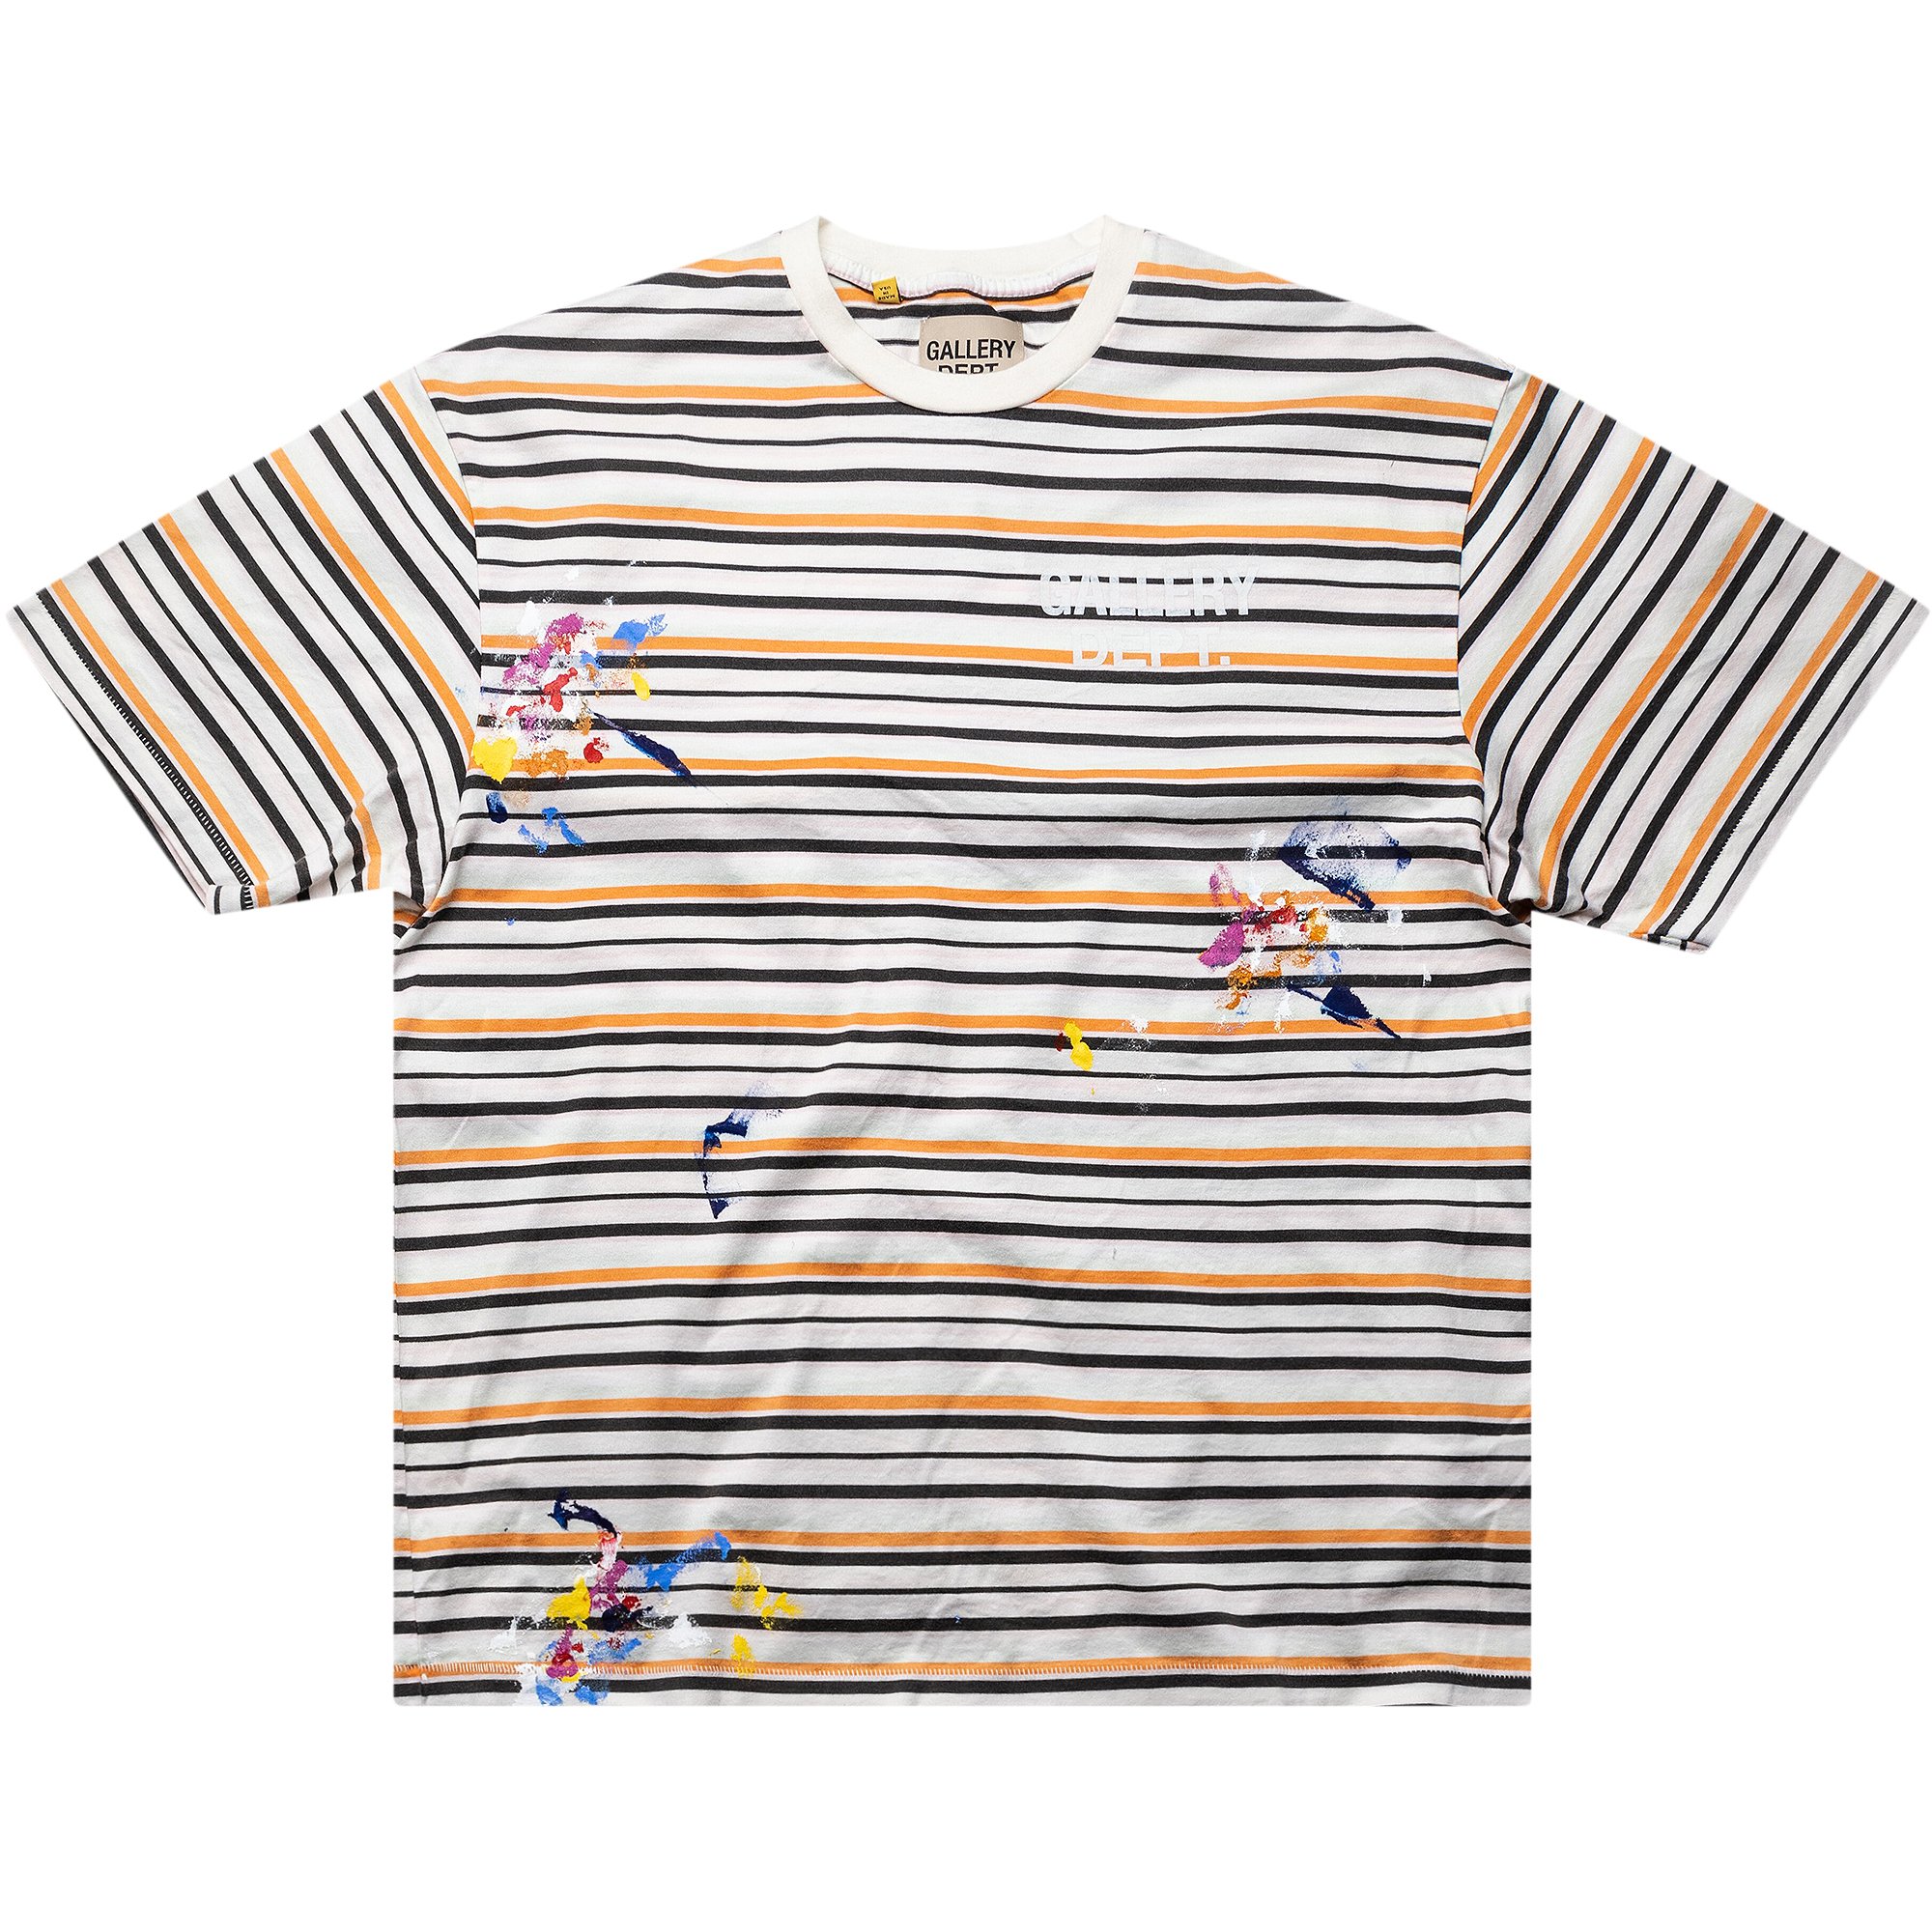 Gallery Dept. Nelson Striped Tee 'Multicolor' | GOAT